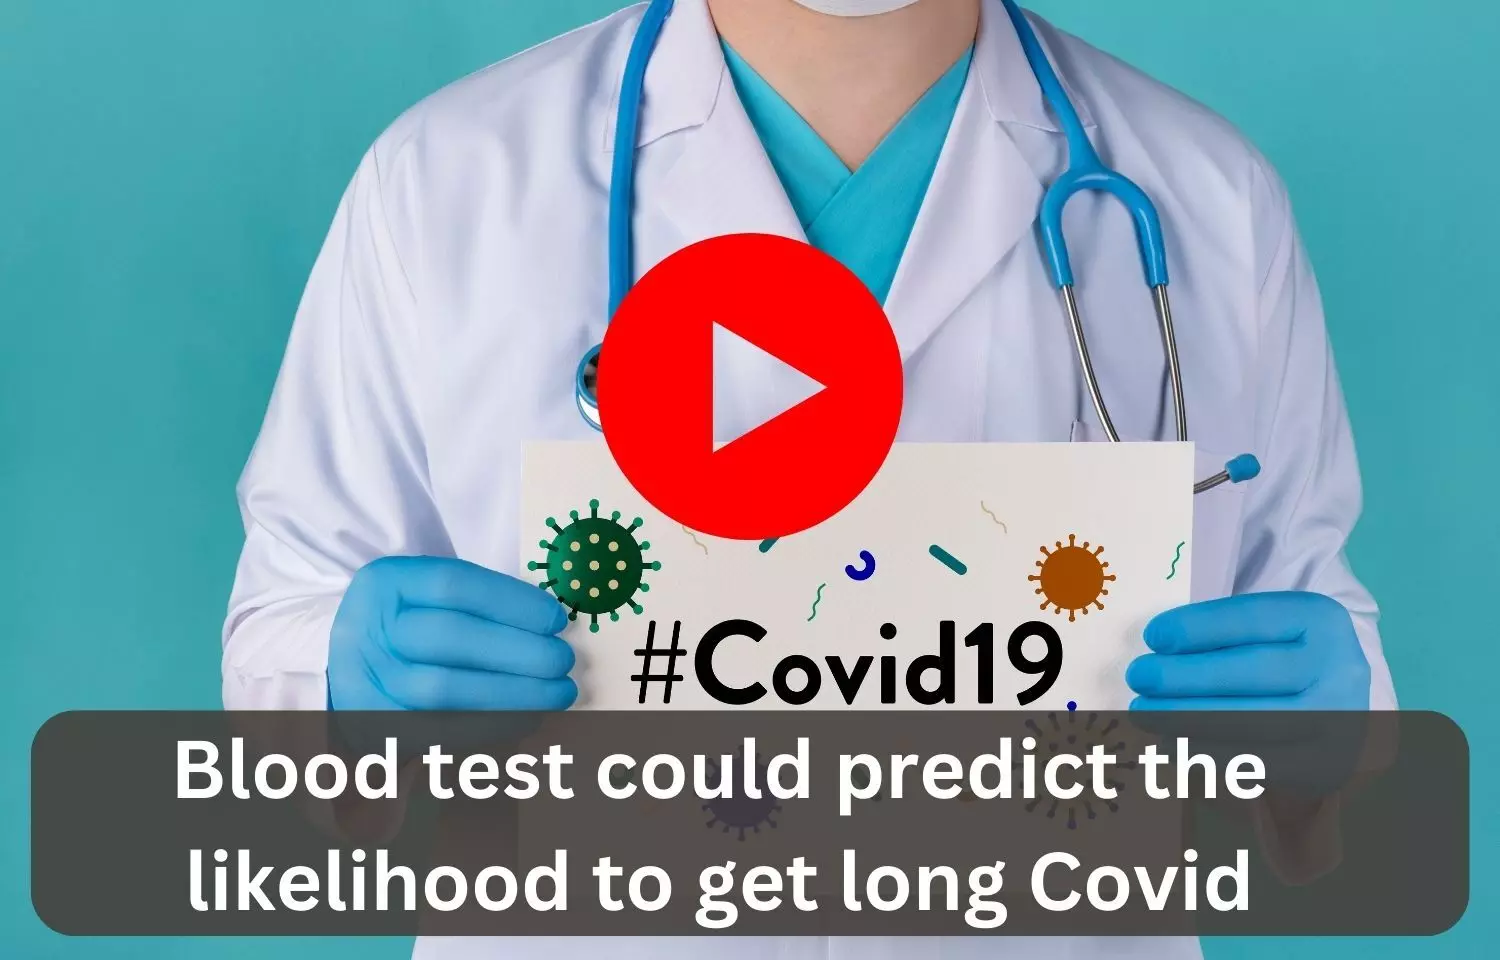 Blood test could predict the likelihood to get long COVID